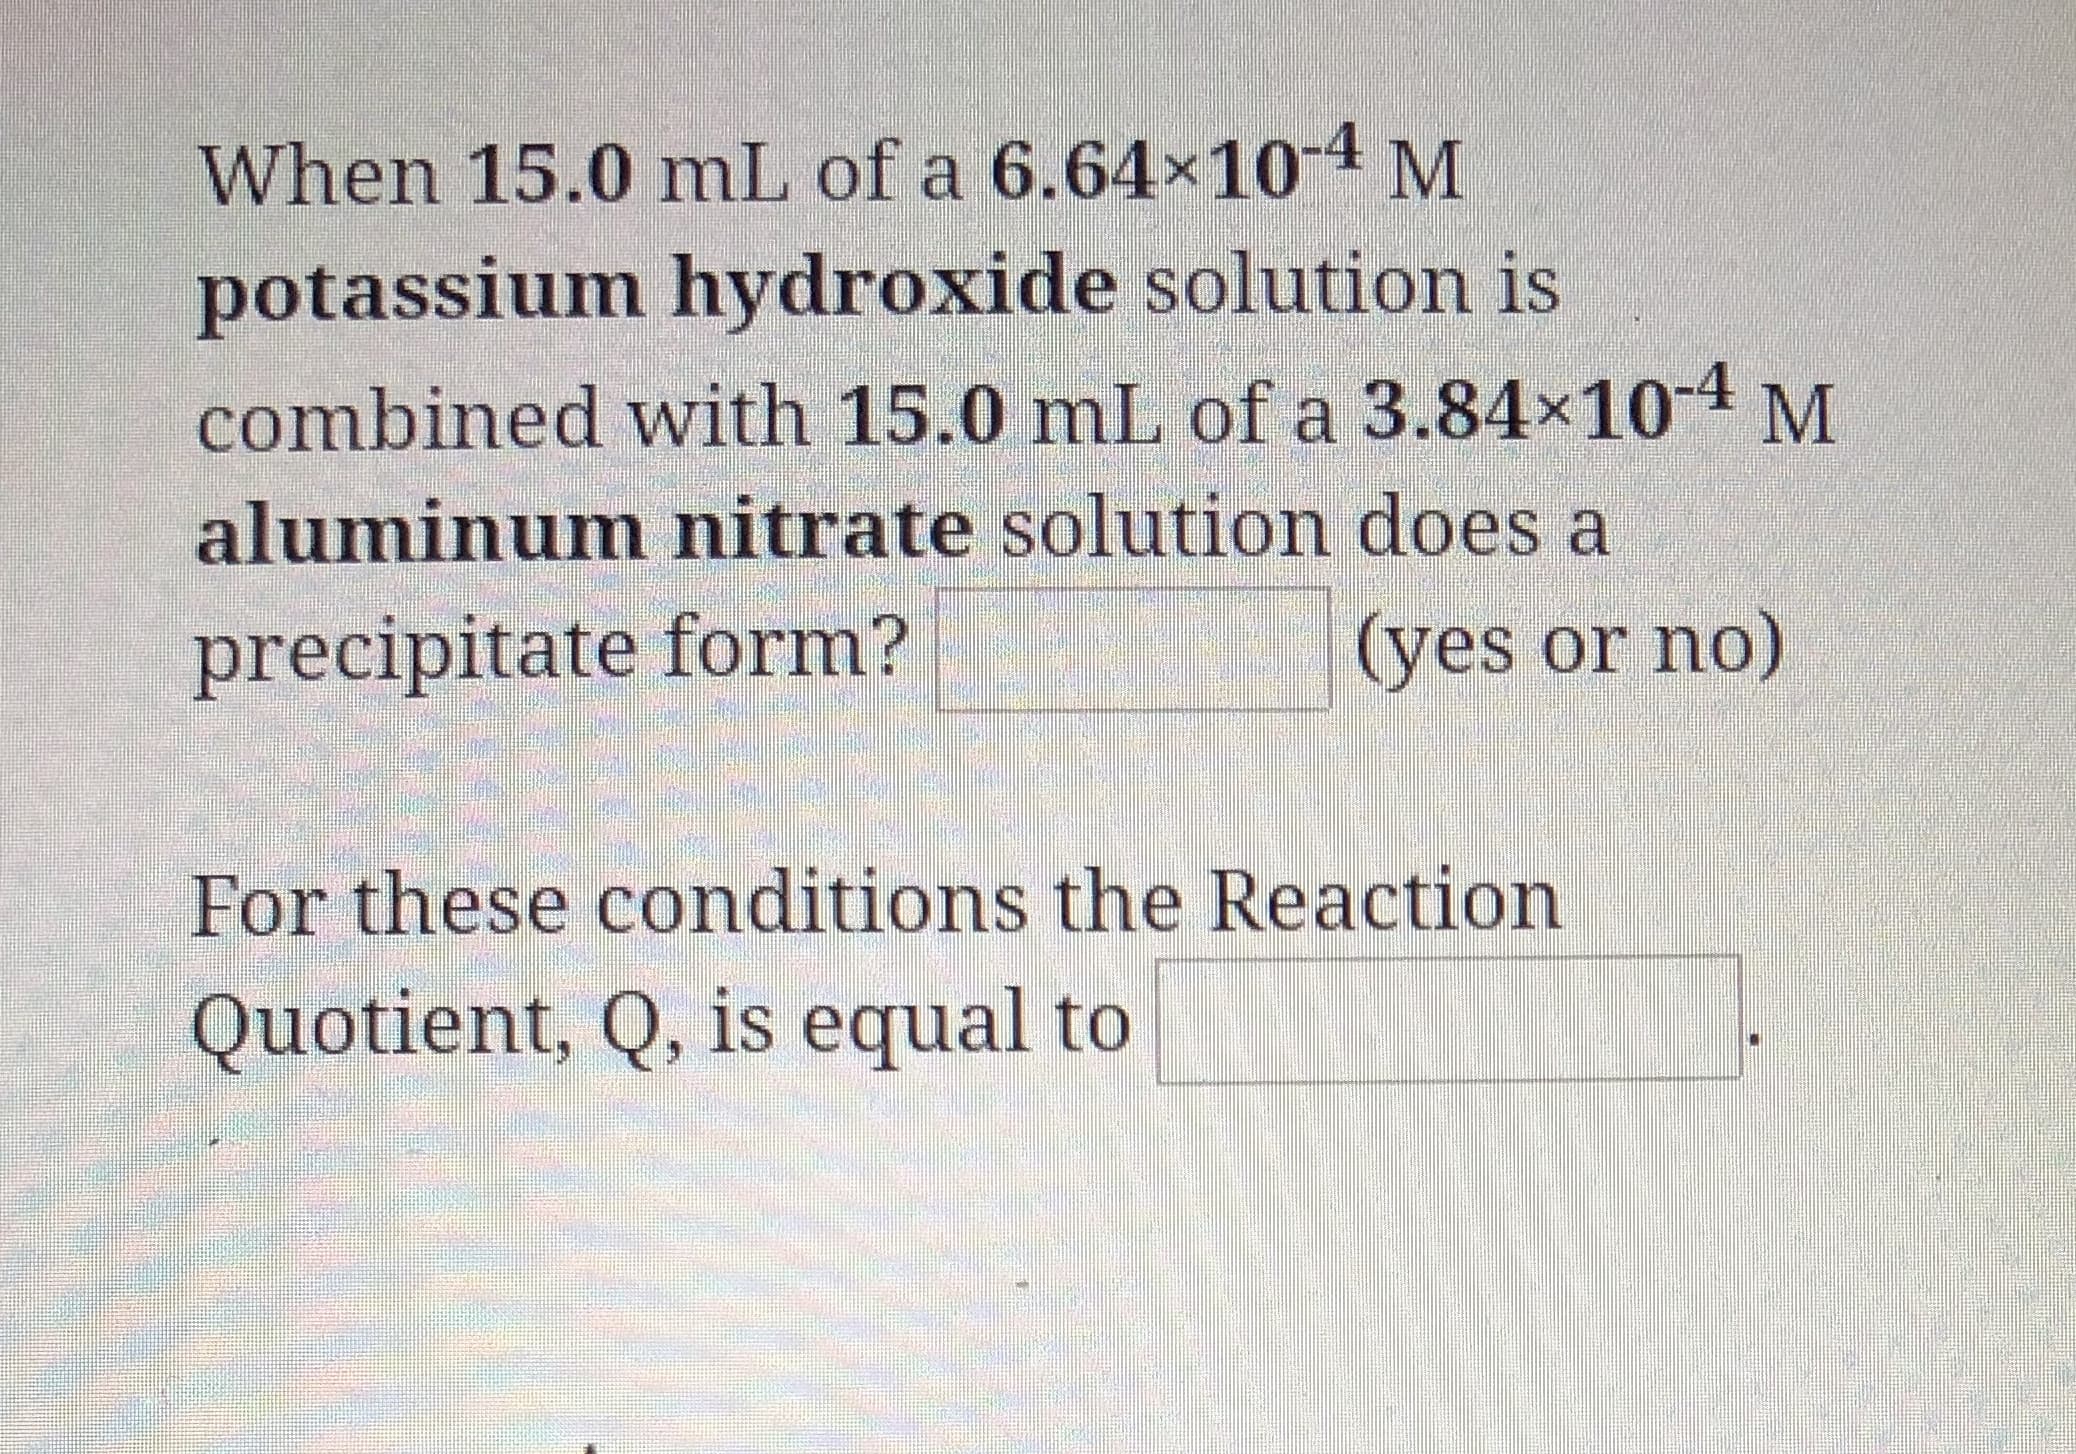 When 15.0 mL of a 6.64x104 M
potassium hydroxide solution is
combined with 15.0 mL of a 3.84x104 M
aluminum nitrate solution does a
(yes or no)
precipitate form?
For these conditions the Reaction
Quotient, Q, is equal to
